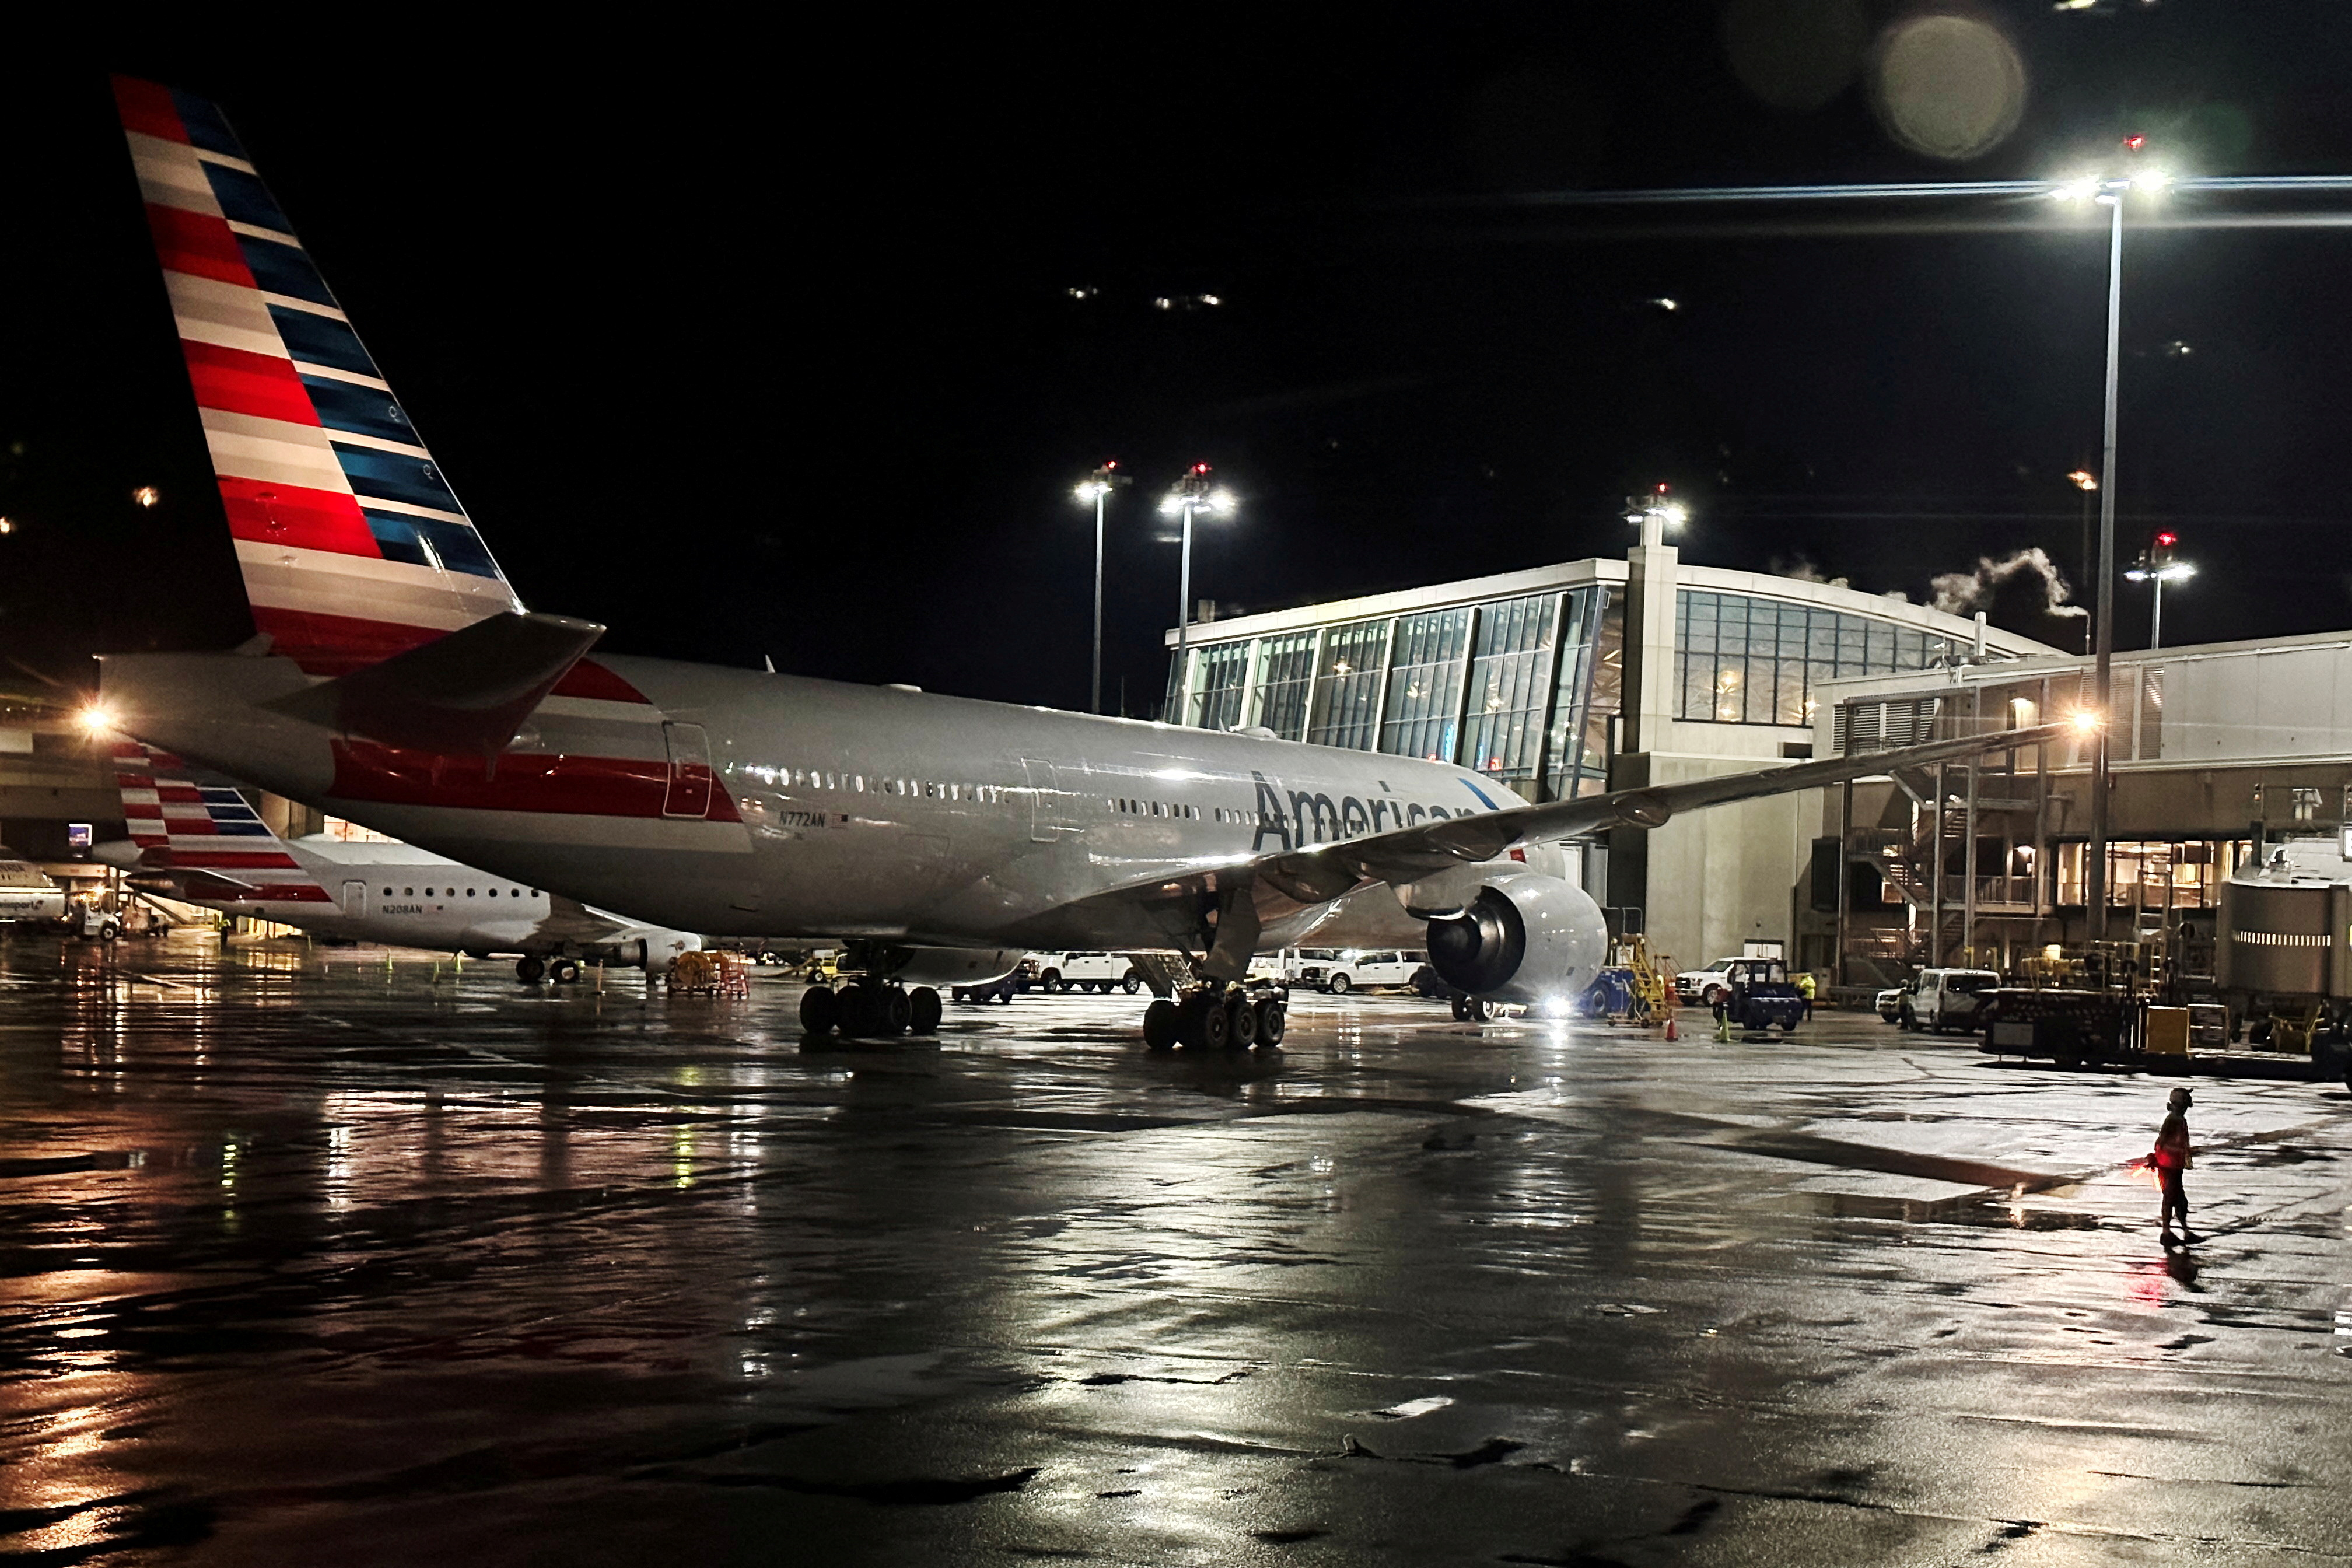 An American Airlines plane sits at a gate at Logan Airport ahead of the July 4th holiday in Boston